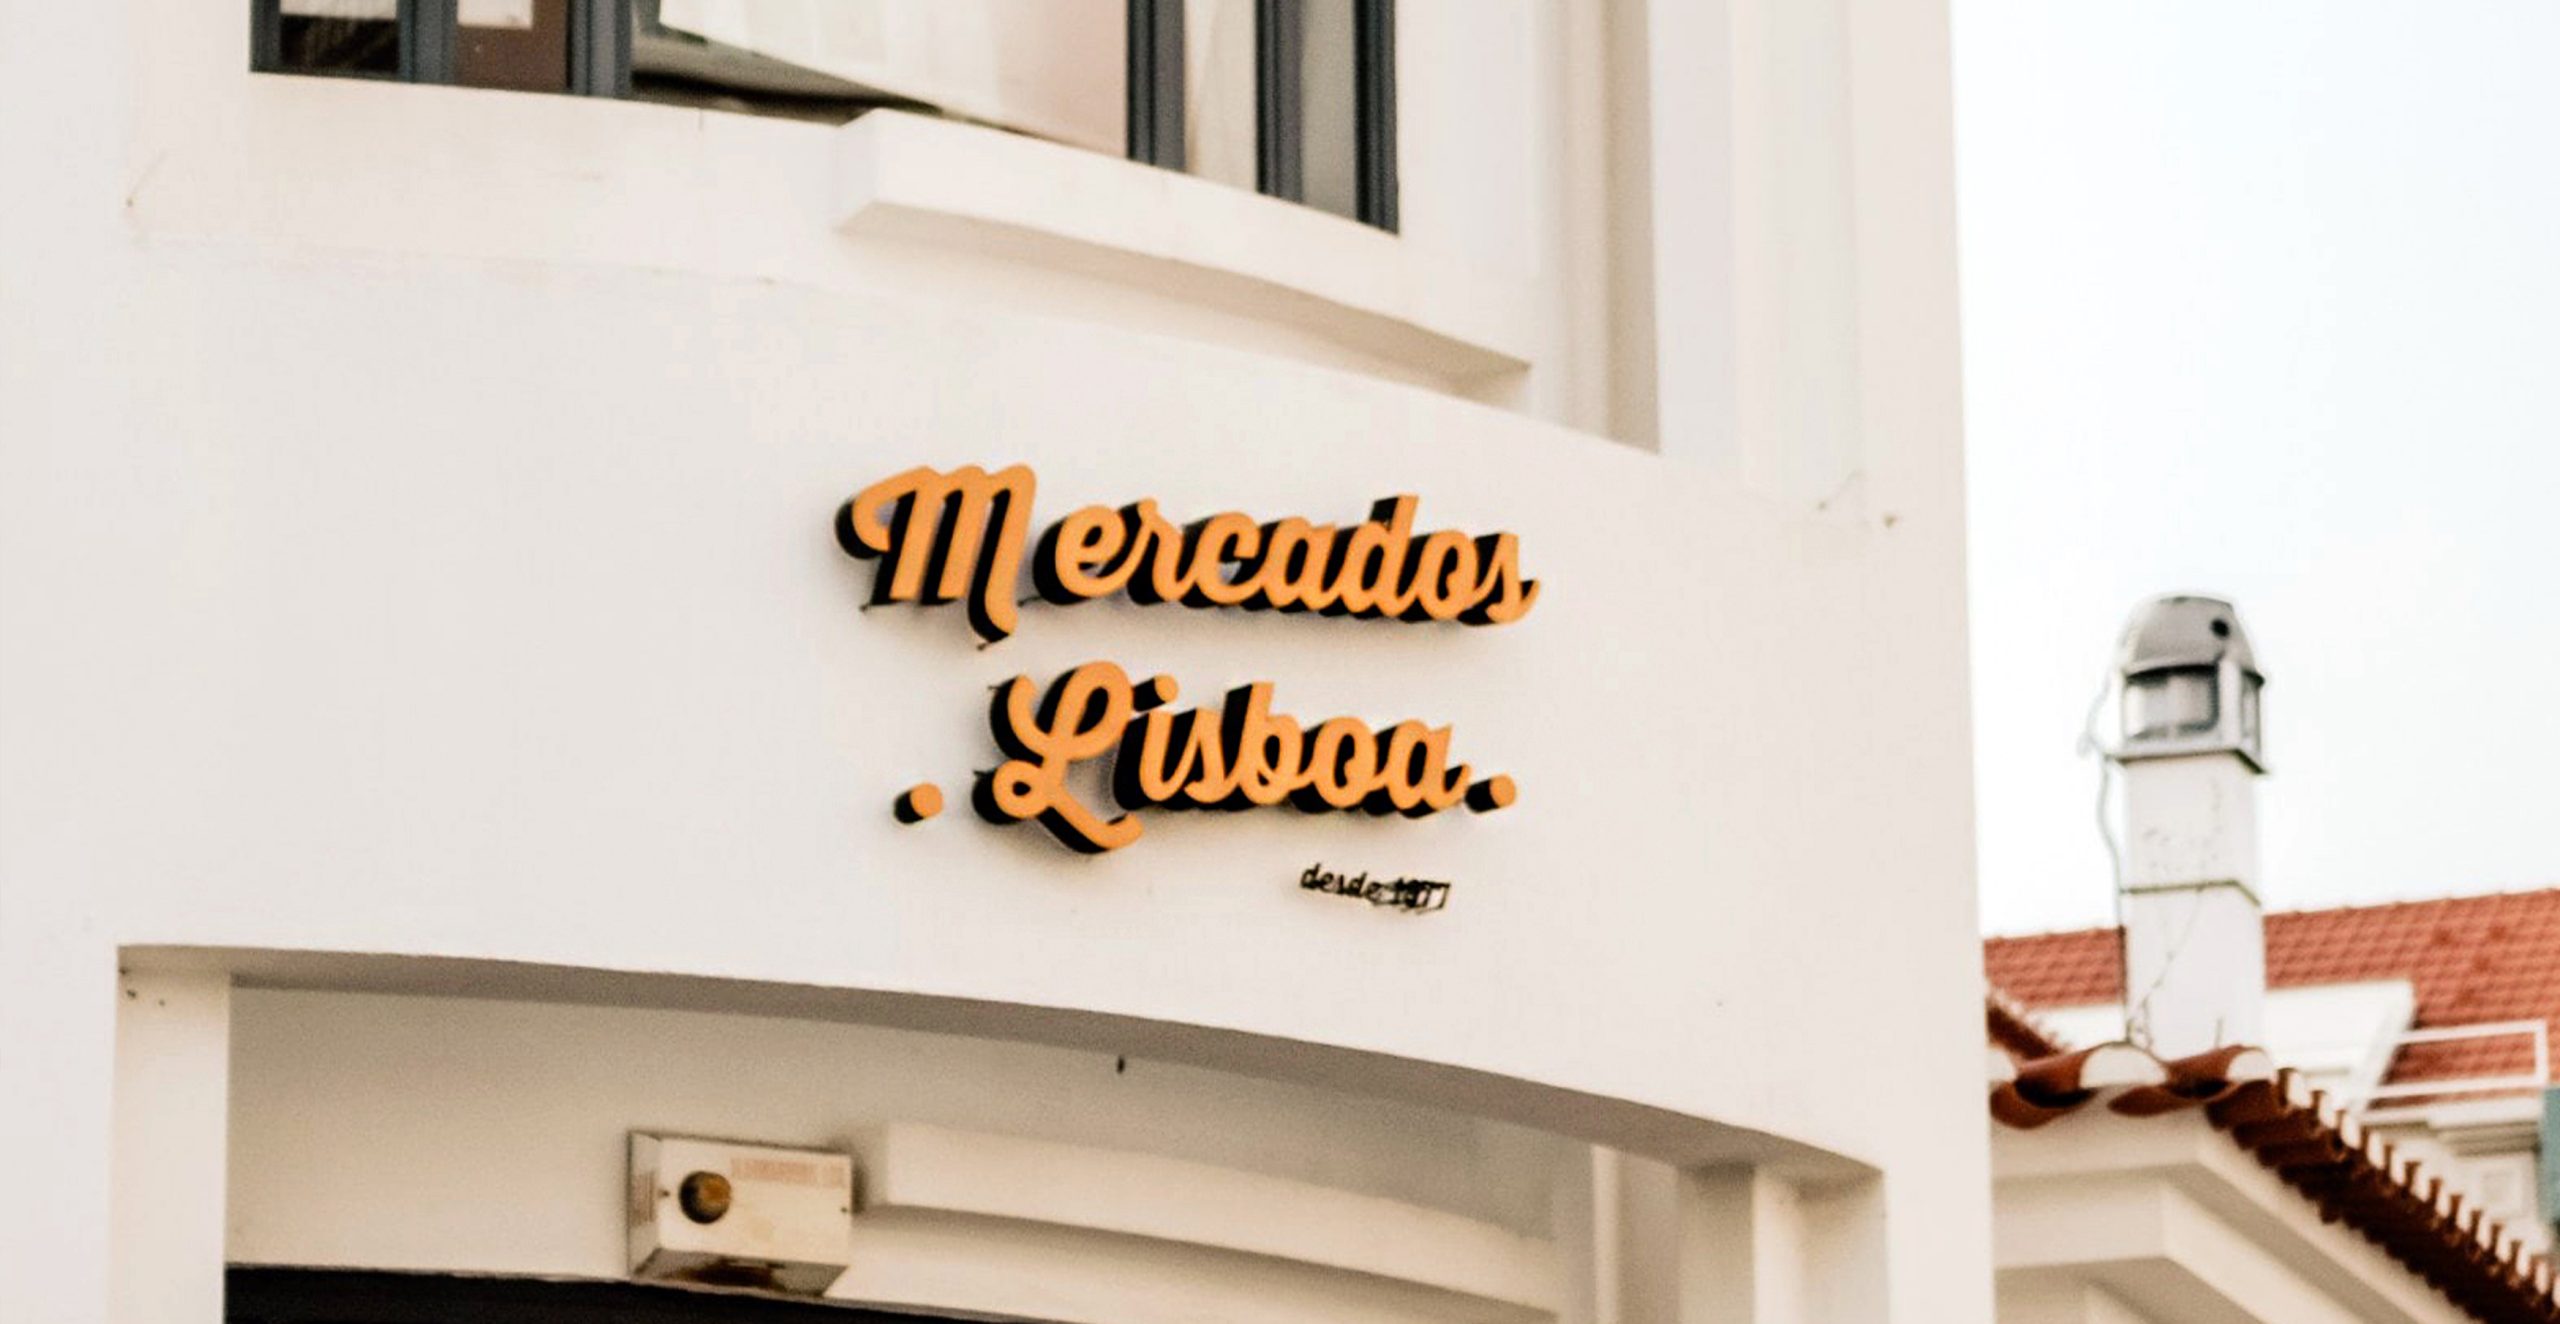 Make a Statement with Stunning Storefront Signs!